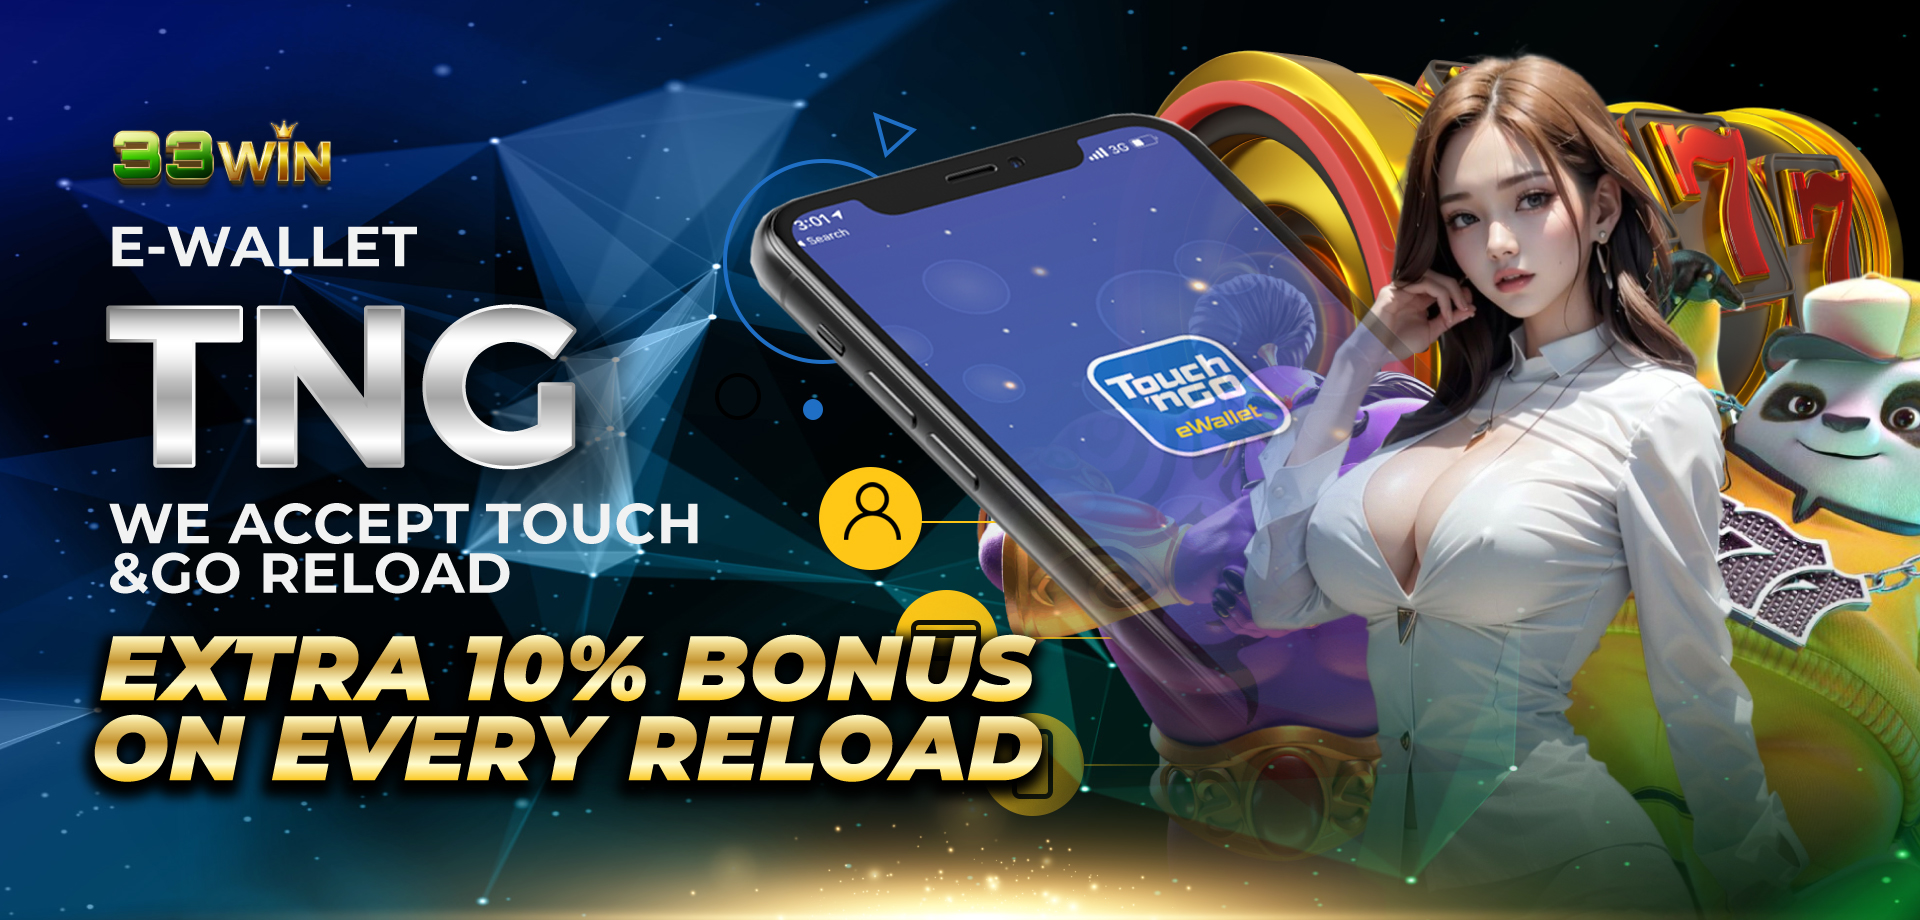 We Accept Touch & Go Reload - Extra 10% Bonus On Every Reload